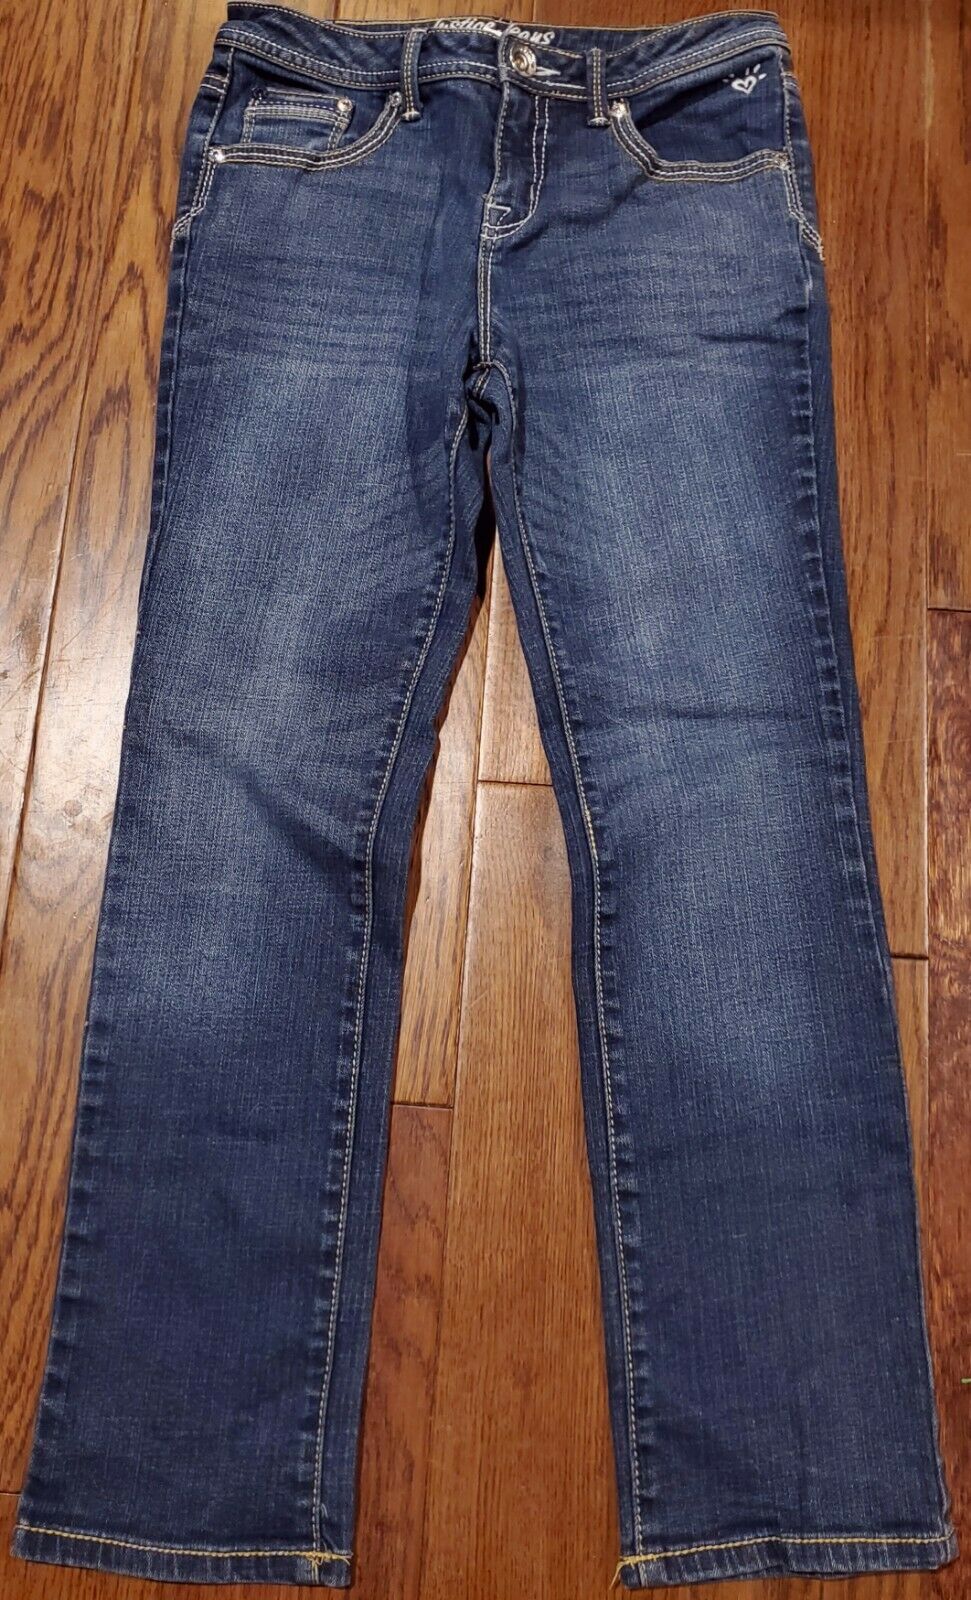 Girls Justice Jeans Size 10-1/2 Euc! Fast Ship! Pants